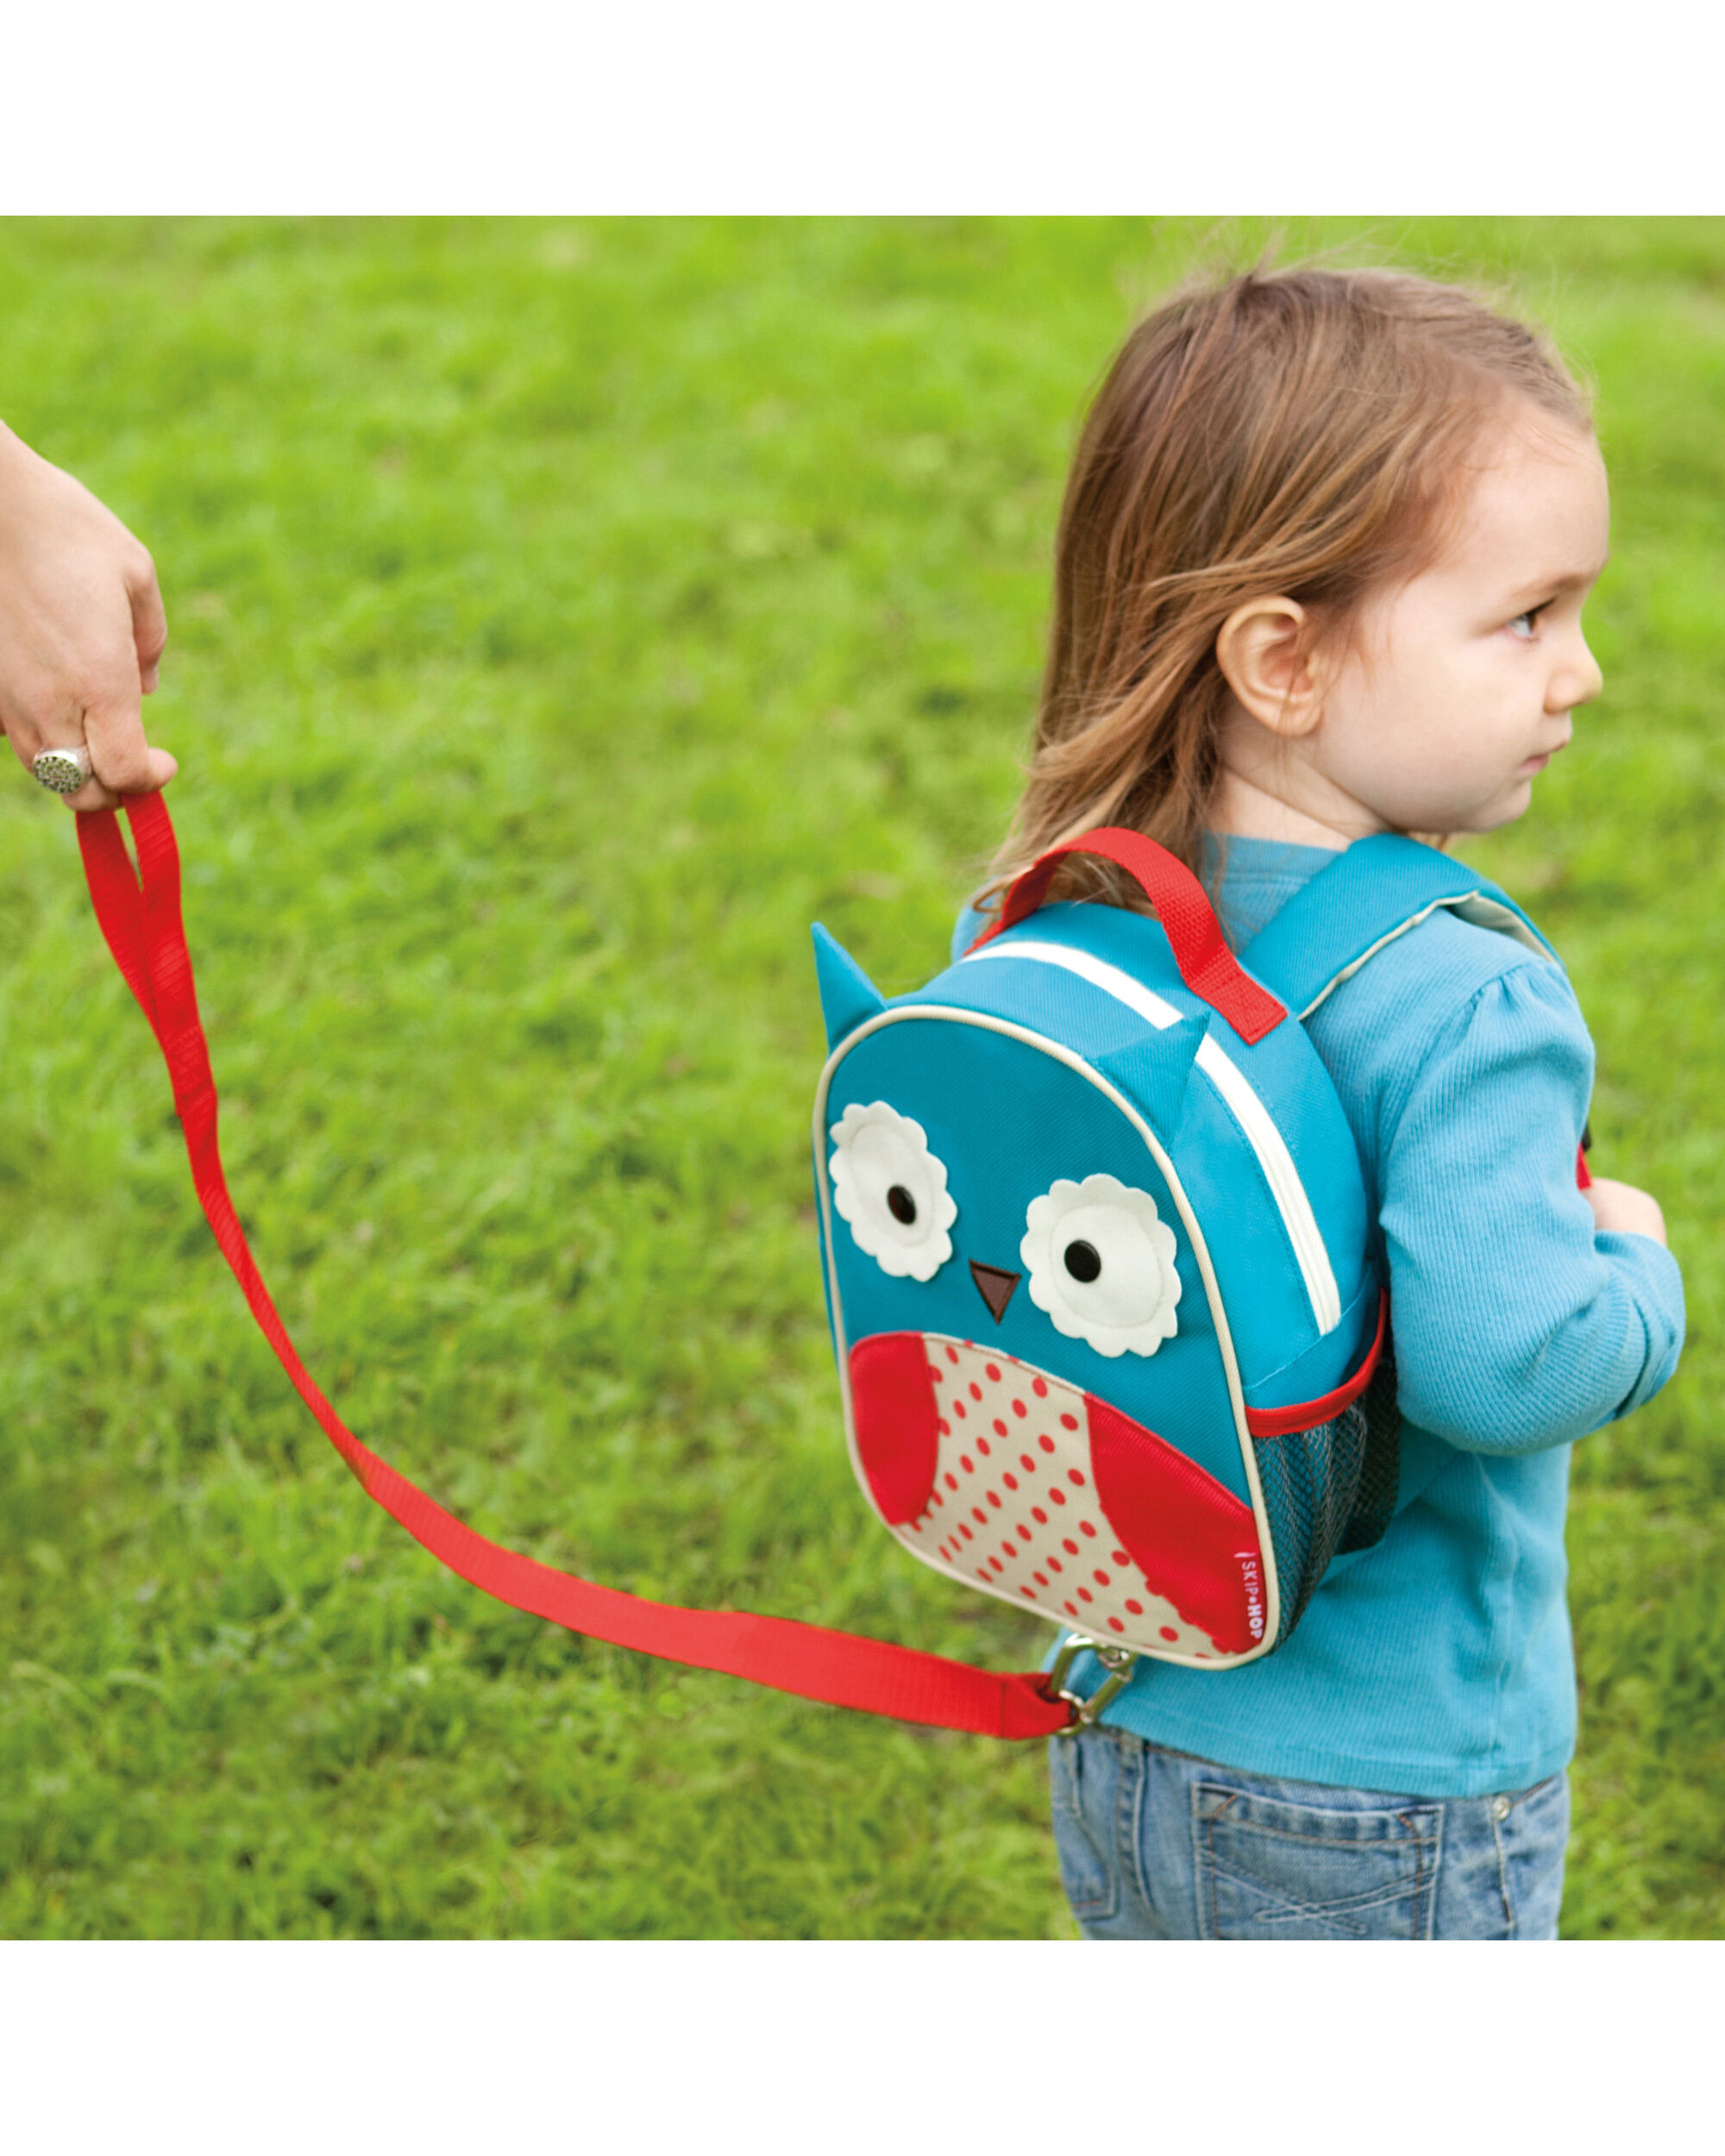 Little Me Owl Backpack with Safety Harness Leash Child Baby Toddler Travel 